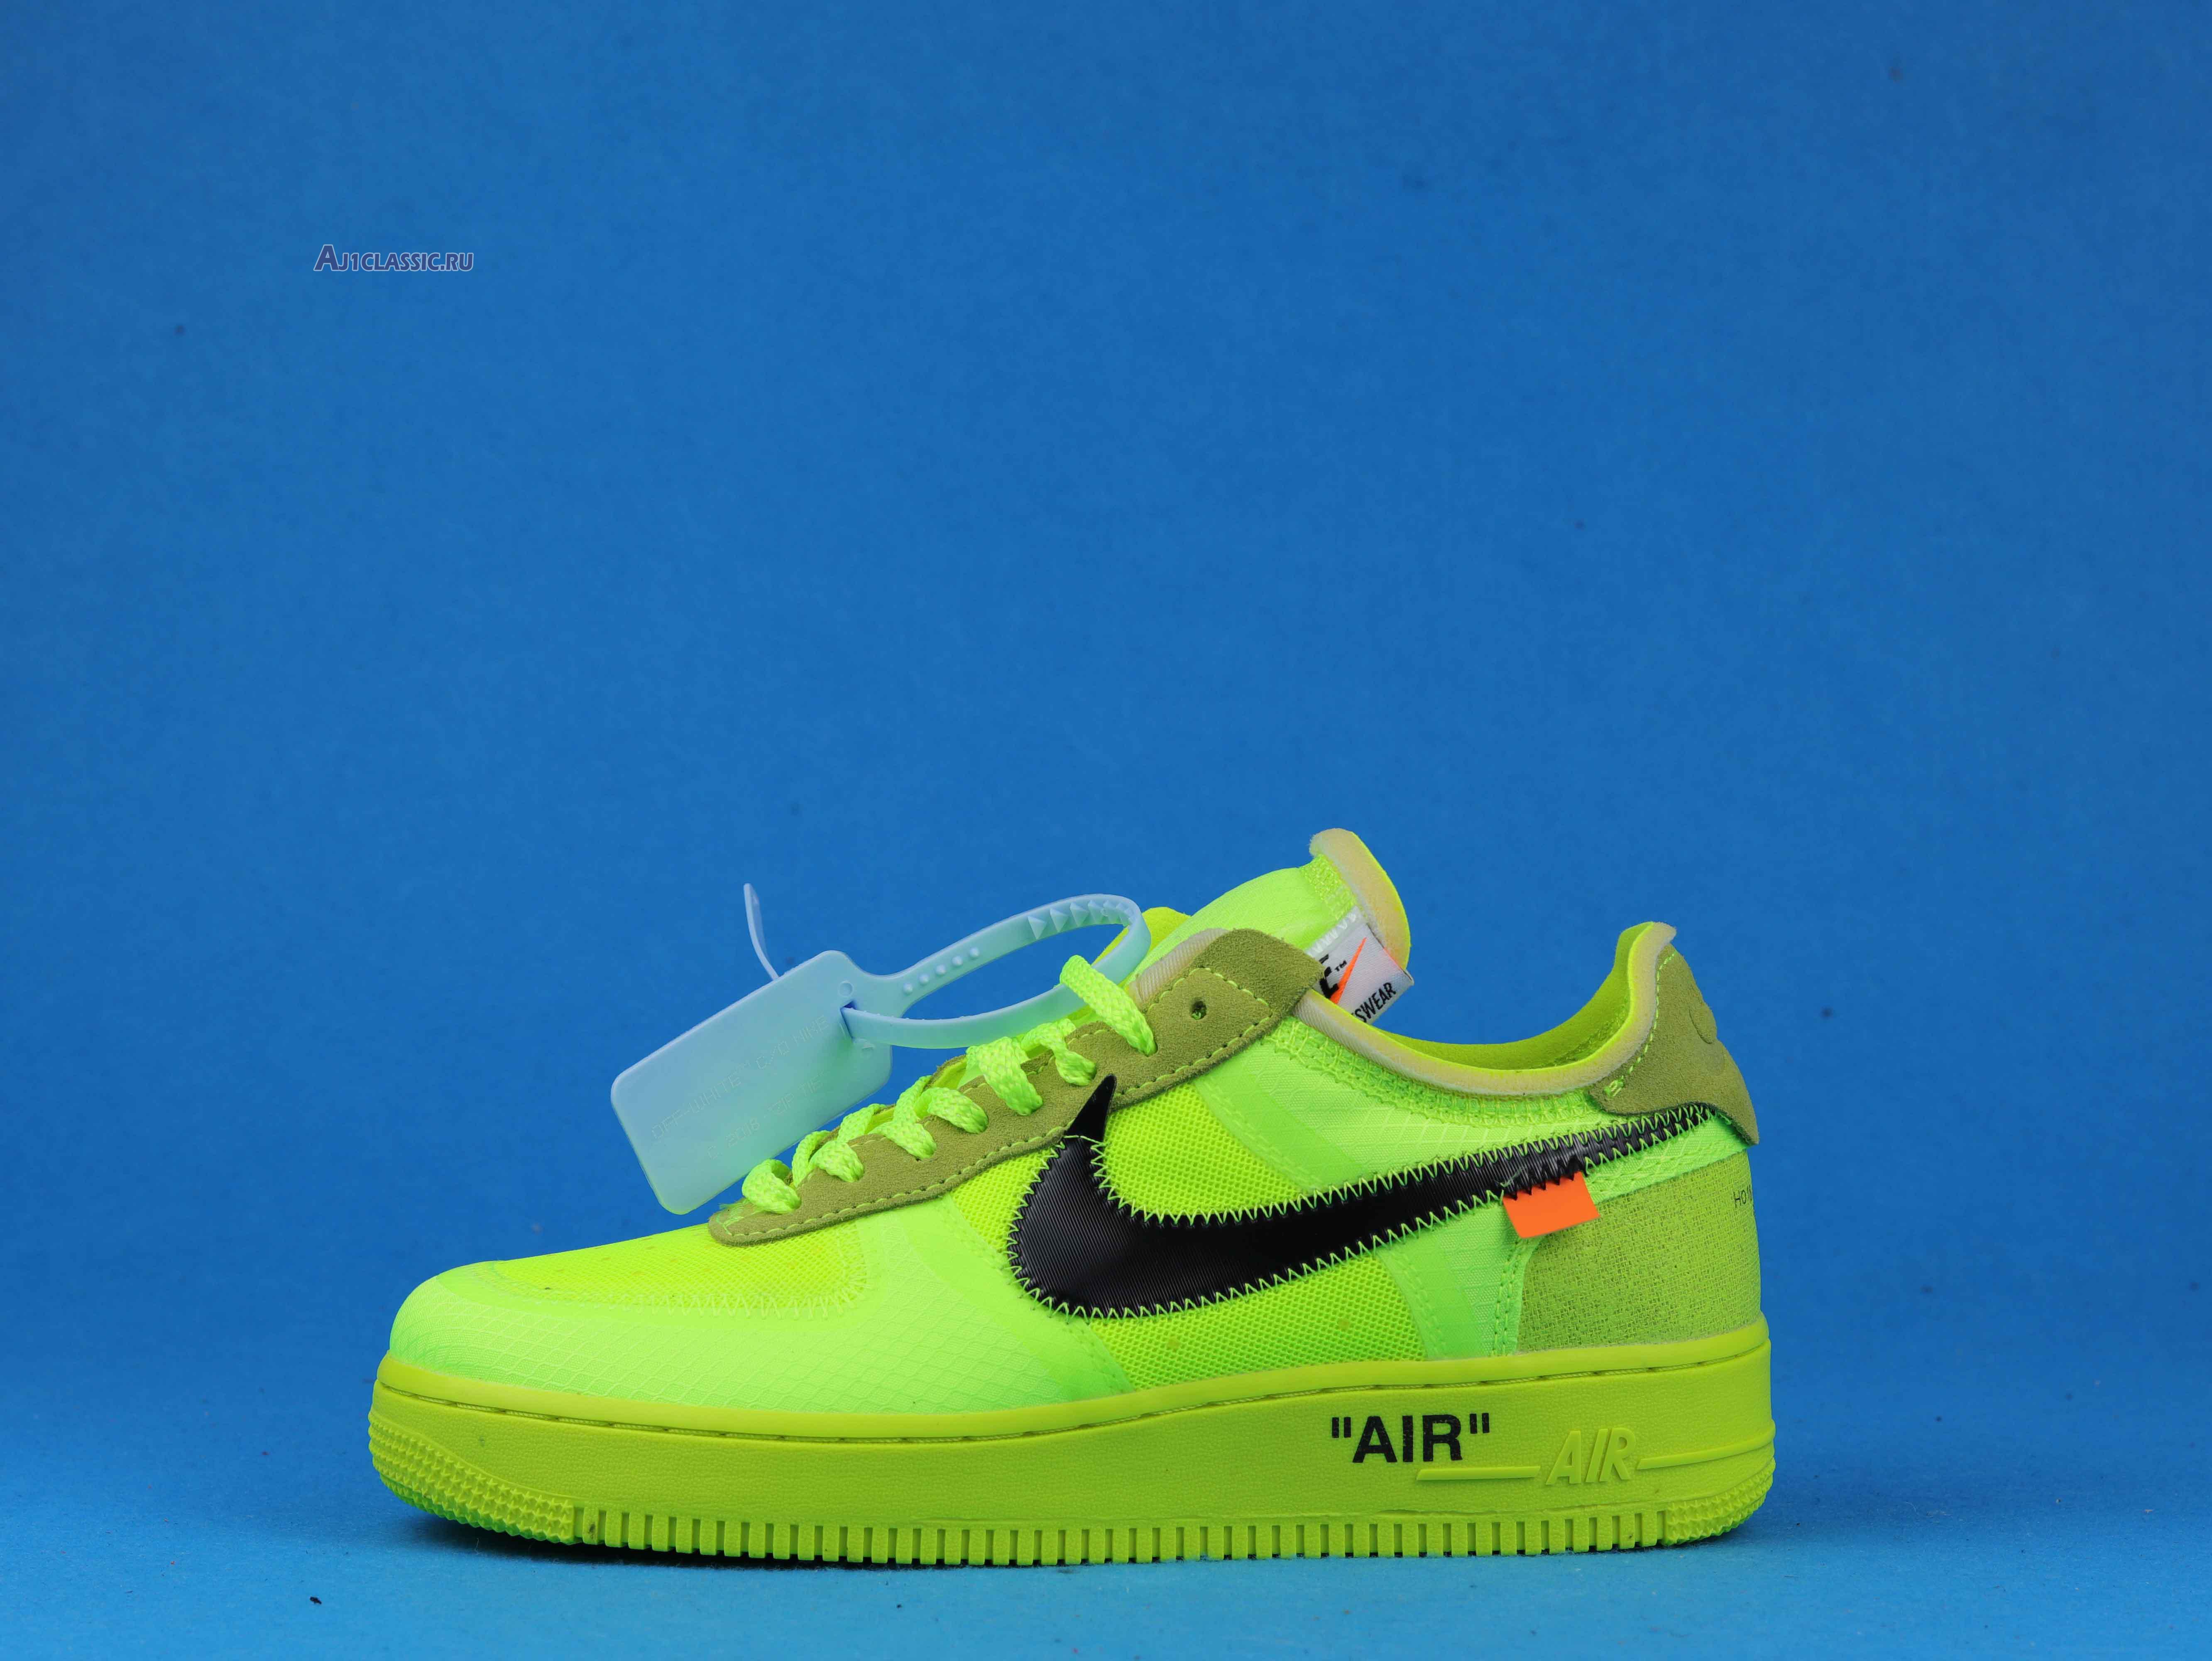 Off-White x Nike Air Force 1 Low "Volt" AO4606-700